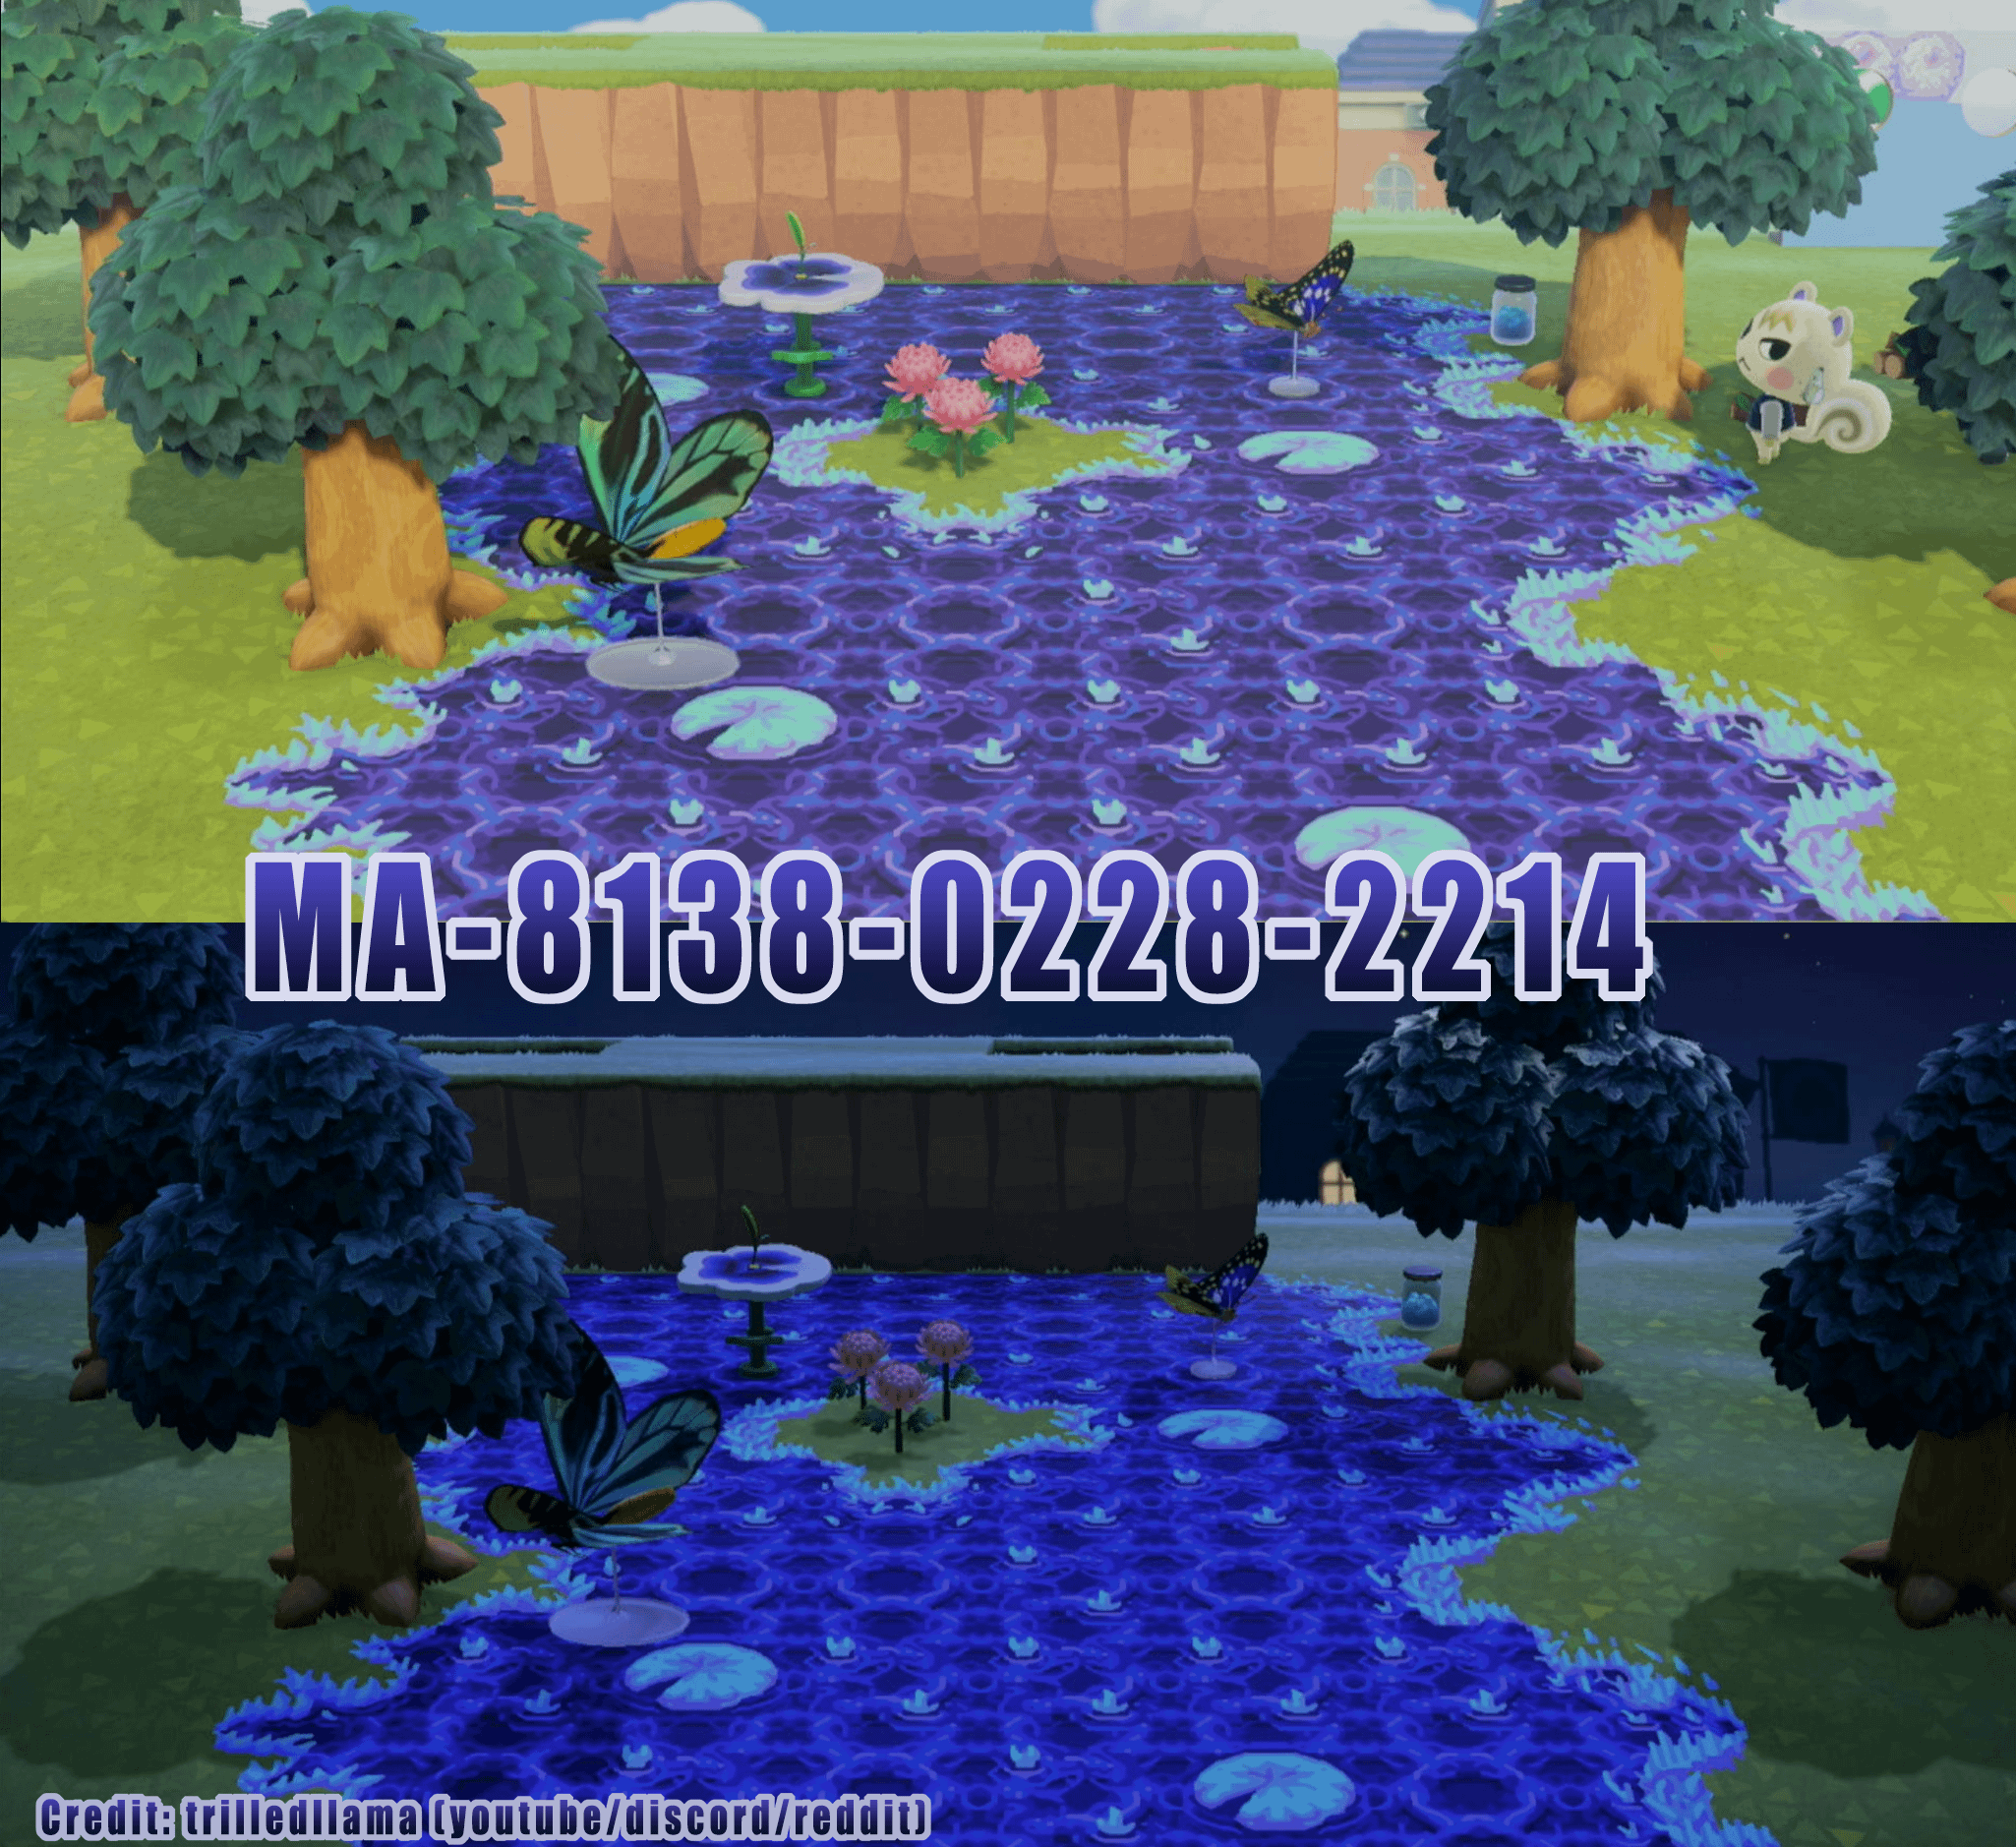 Animal Crossing Made a magical water code to go with